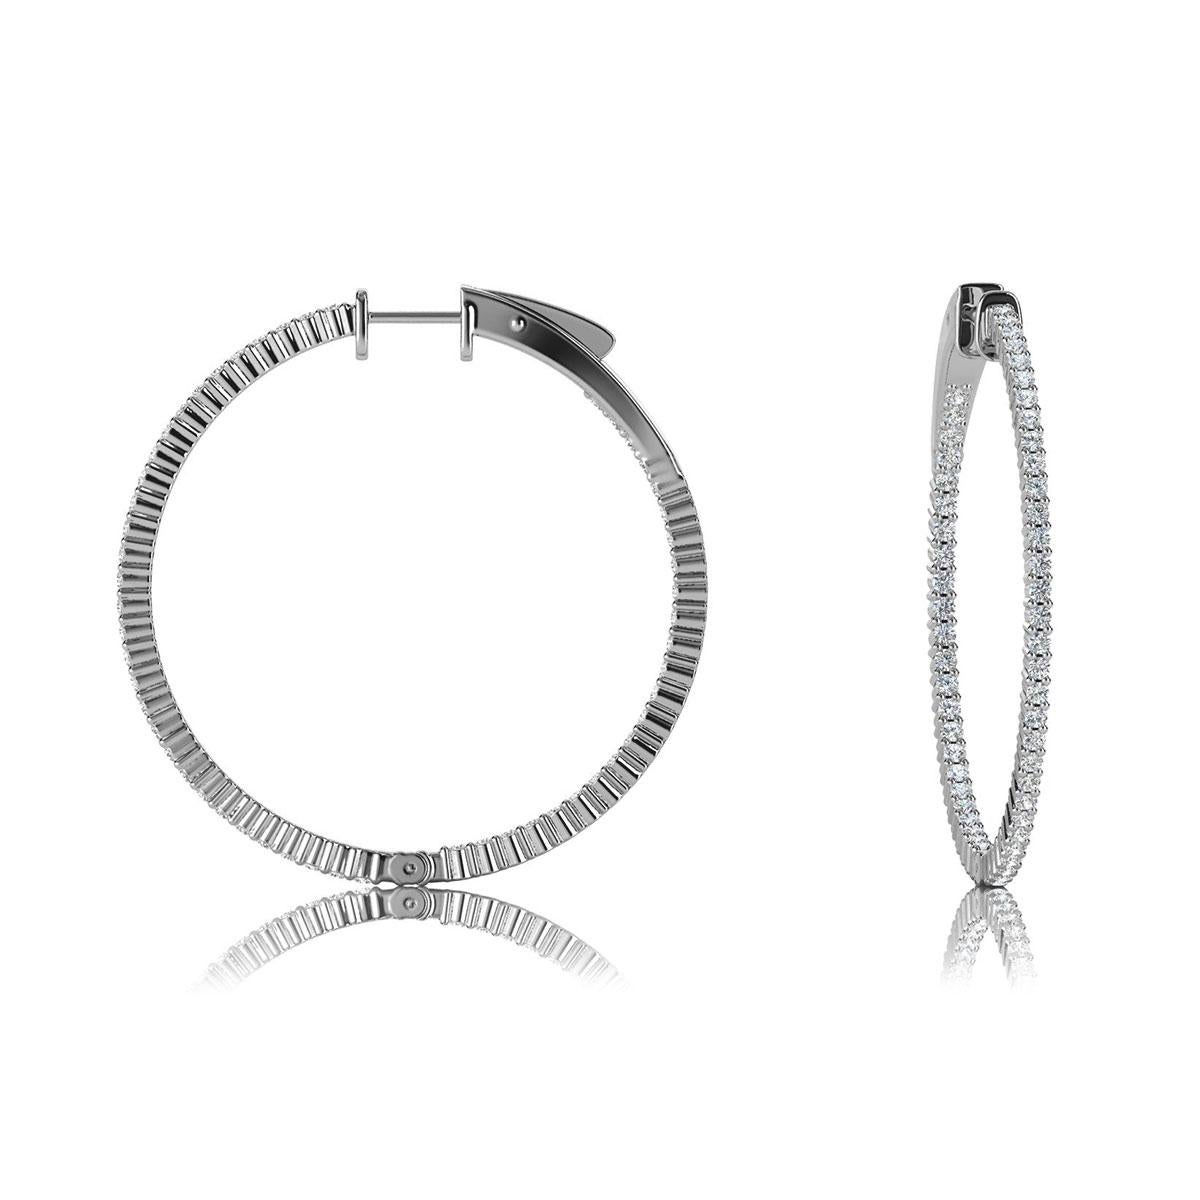 This hoop earring features round brilliant diamonds micro-prong set. The diamonds are set throughout the earrings outside and on the inner side. It's 1.5 inch in diameter. Experience the difference!

Product details: 

Center Gemstone Color: